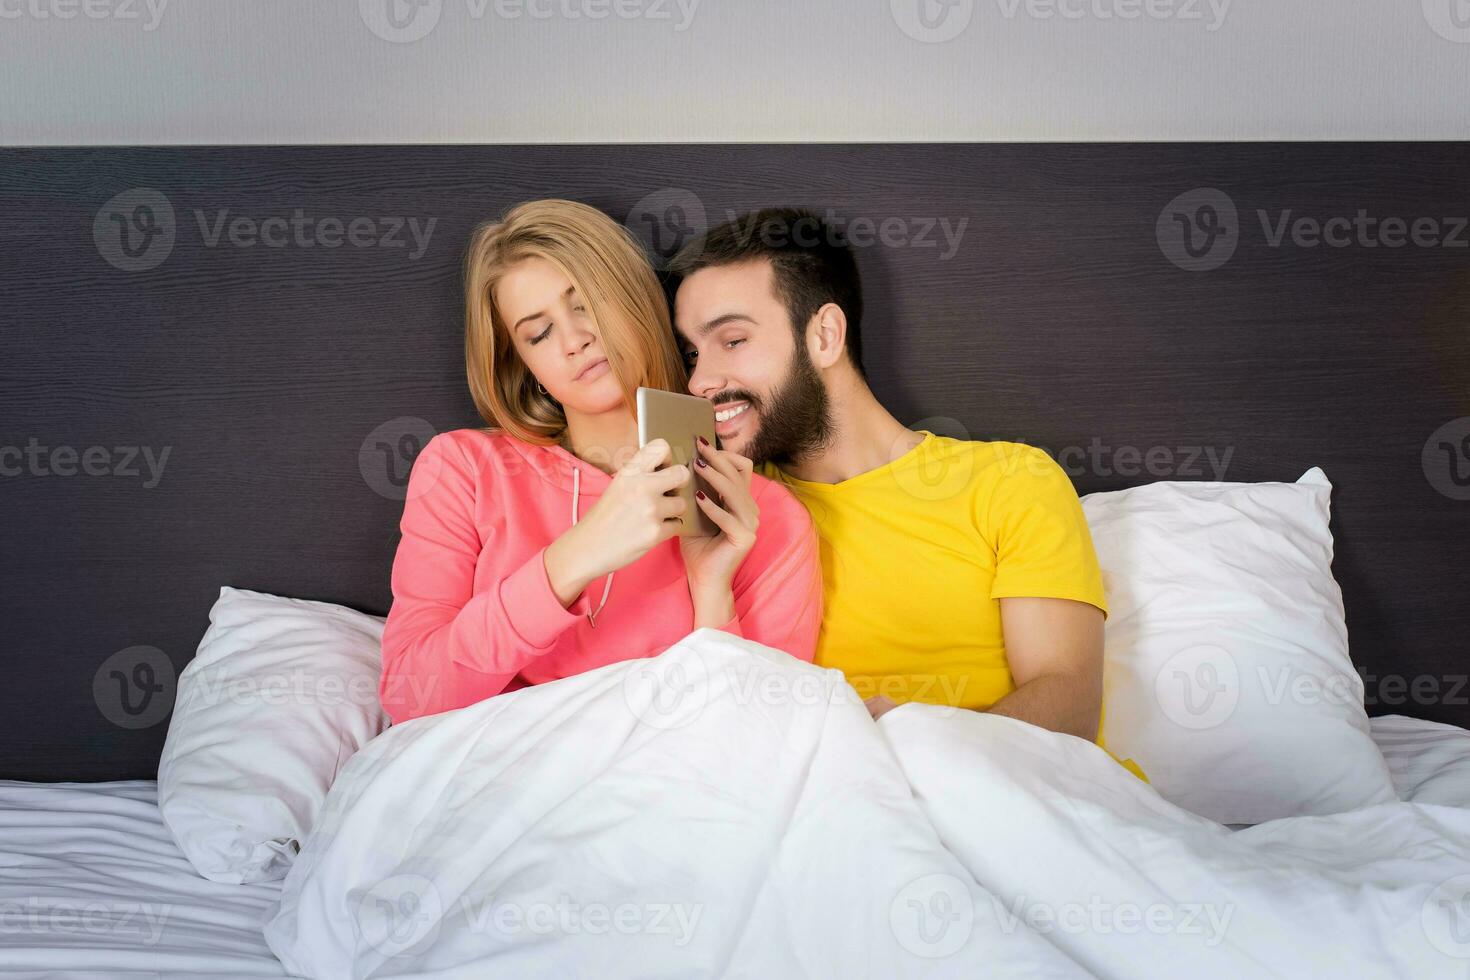 Young Sweet Couple at Bed Watching Something on Tablet Gadget photo